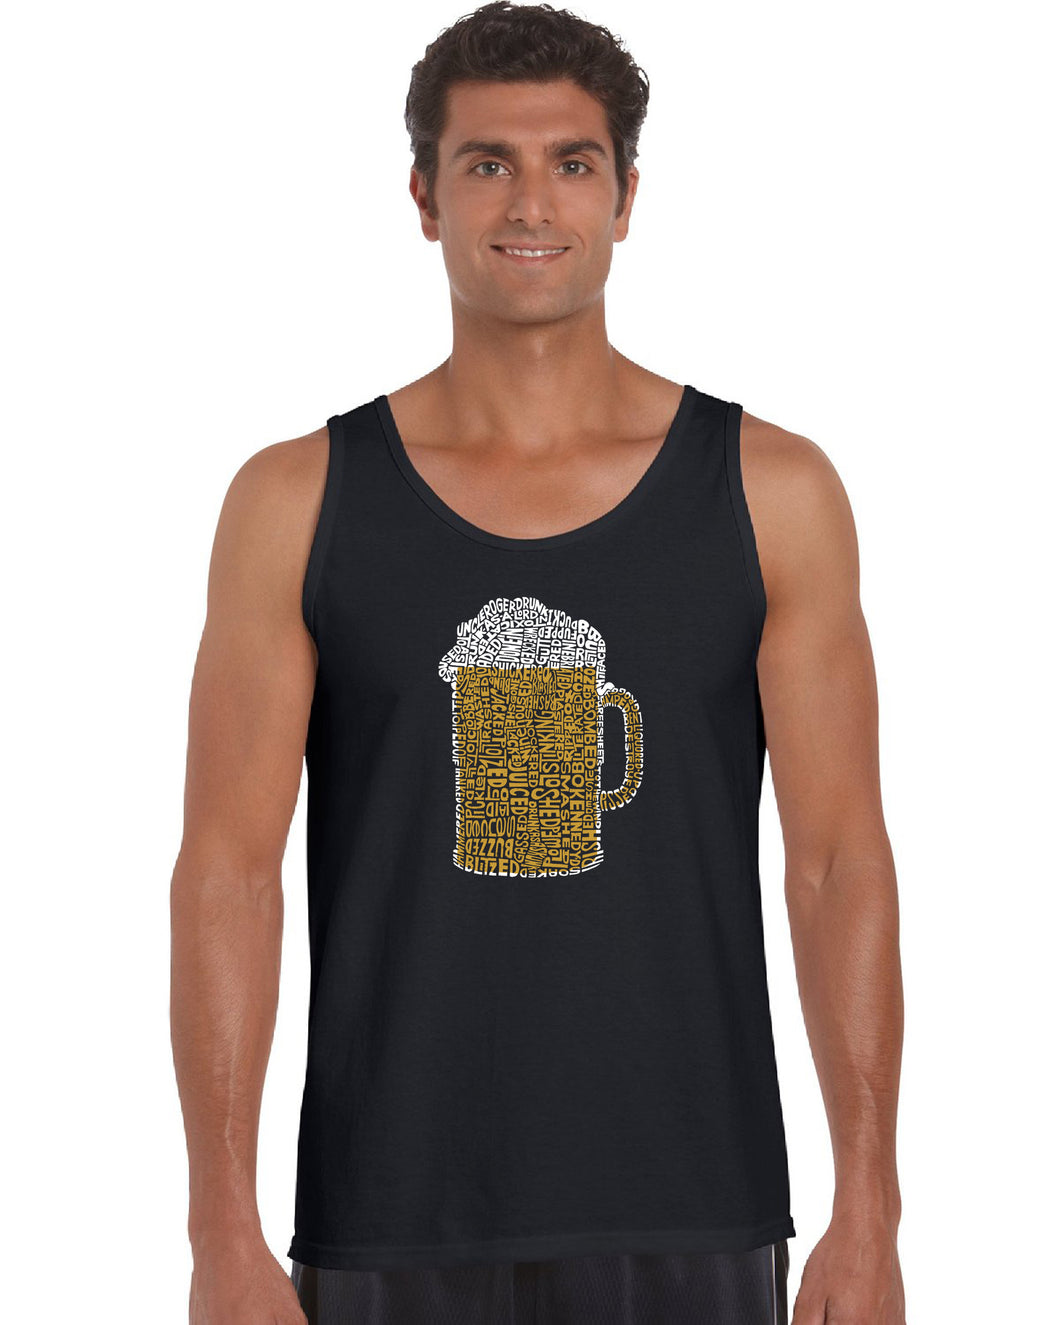 Slang Terms for Being Wasted - Men's Word Art Tank Top